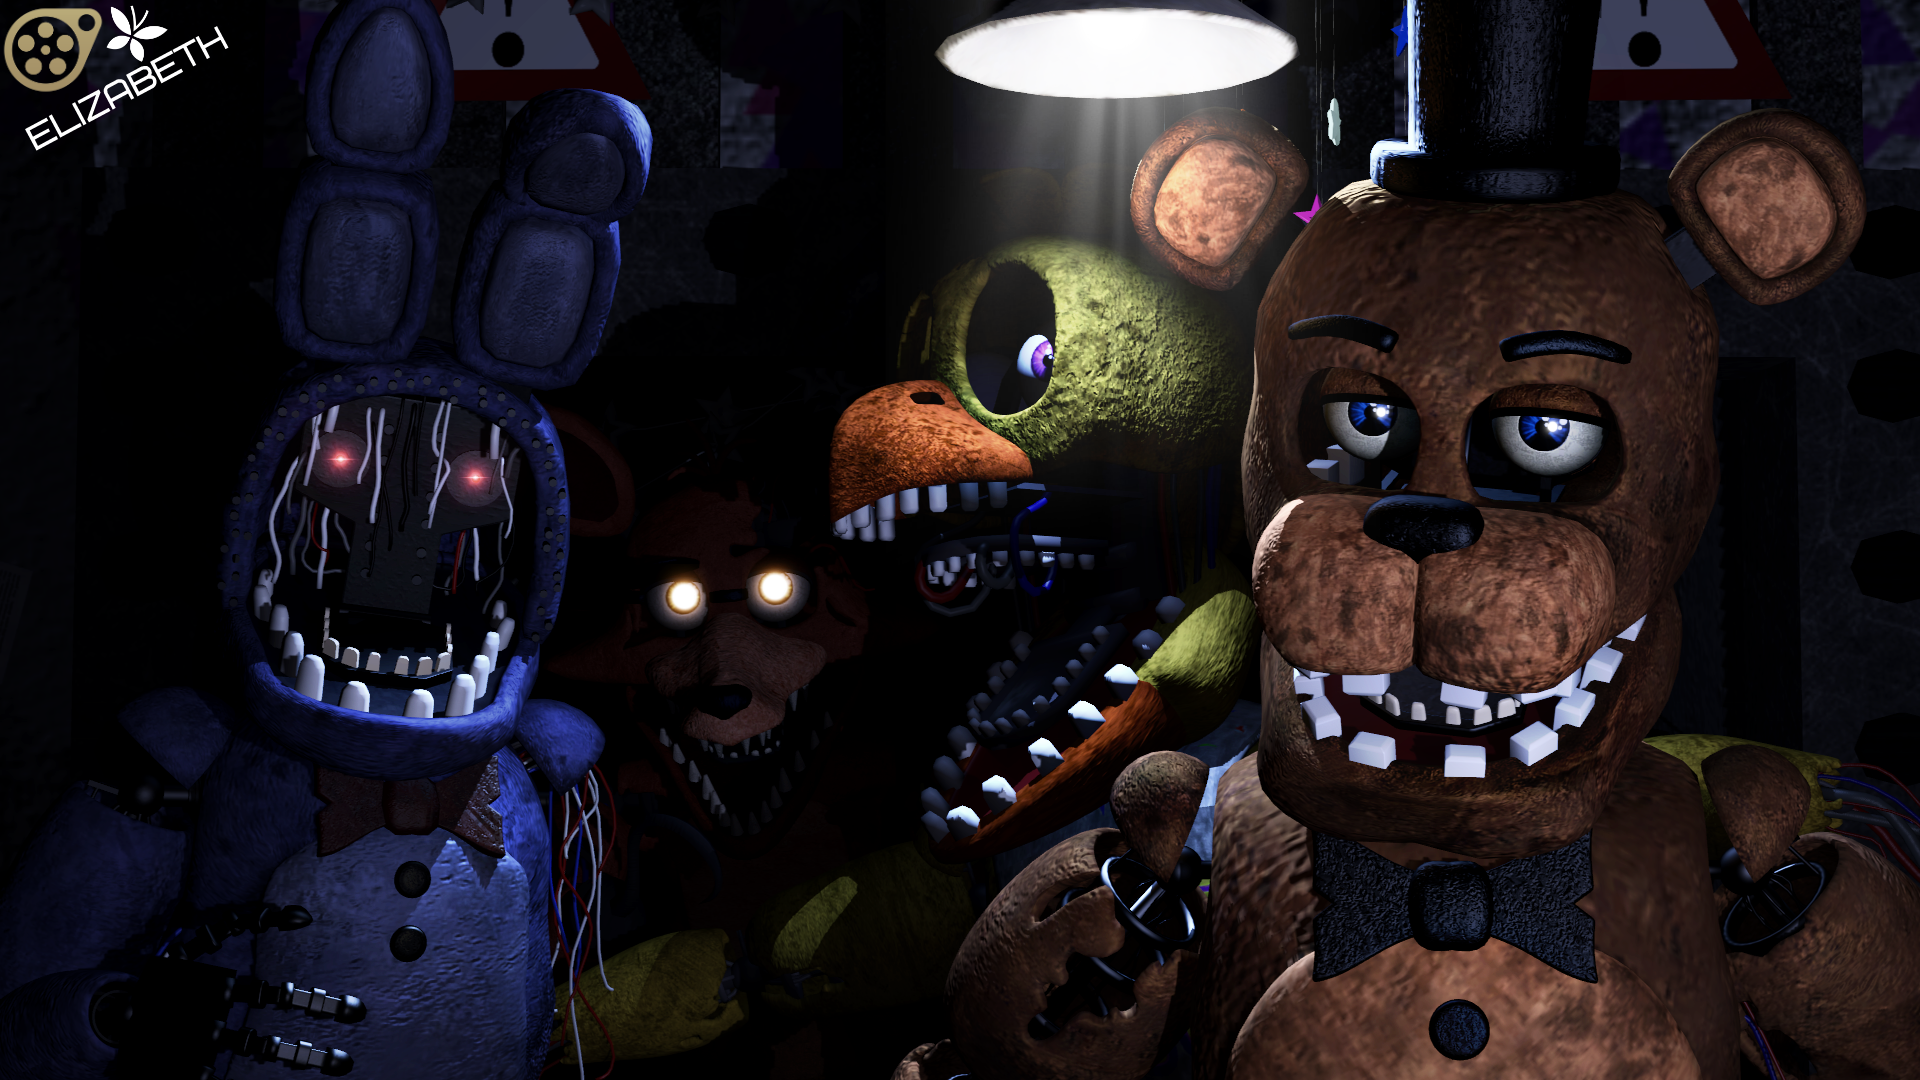 Pin by Angie777 on FNAF! | Fnaf, Five nights at freddys 